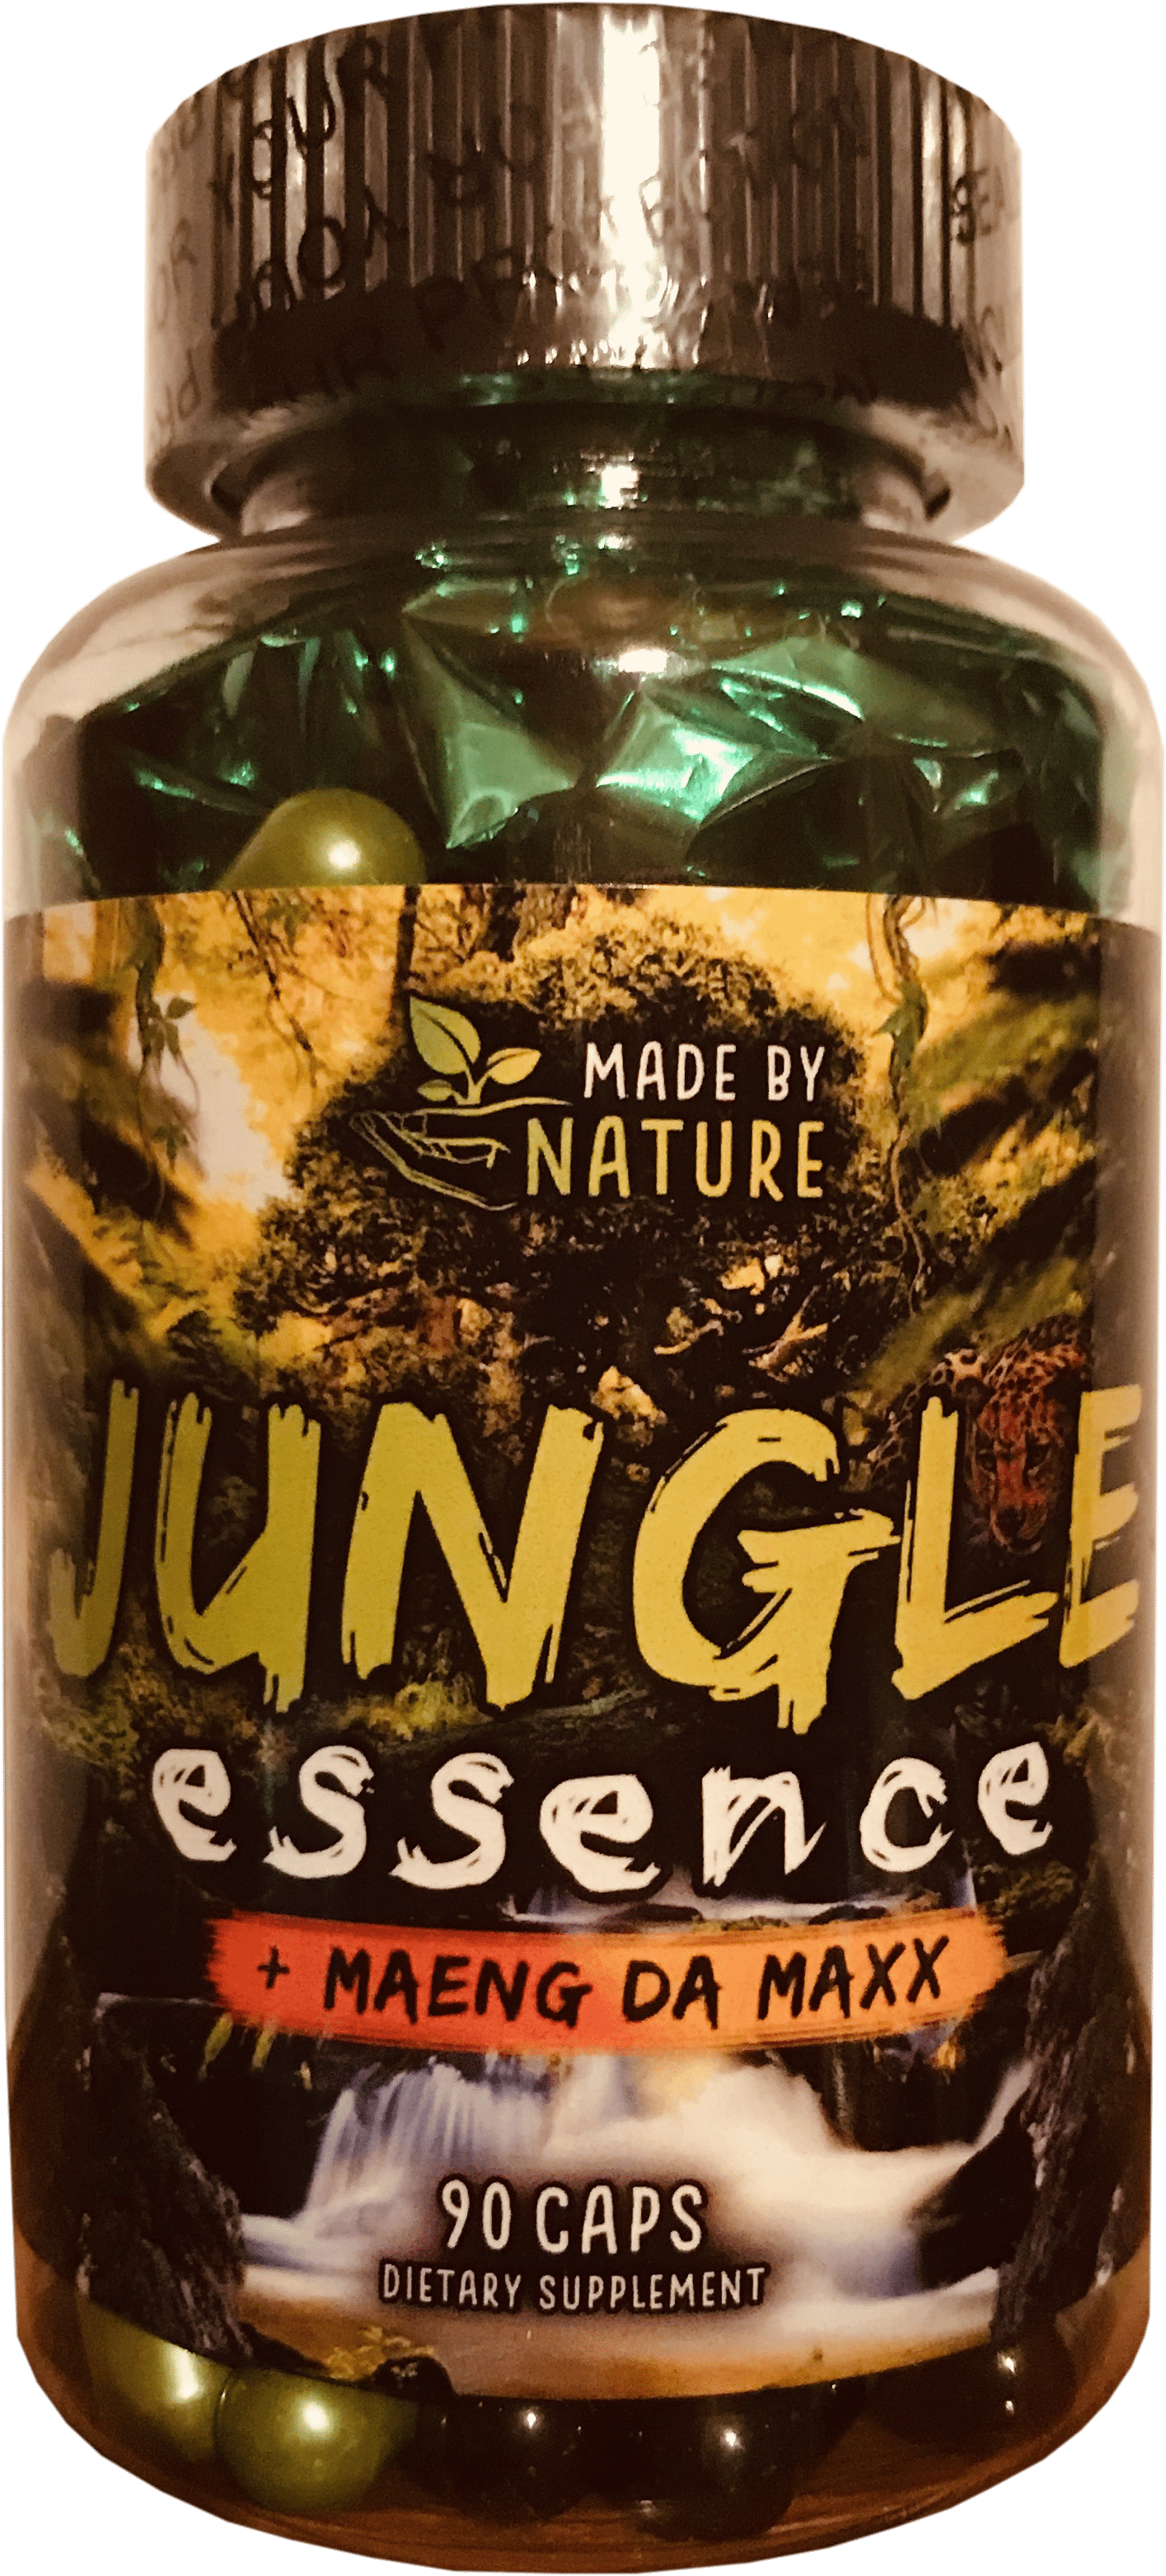 Made By Nature Made by Nature Jungle Essence + Maeng Da Maxx 90 шт. / 13 servings, , 90 шт.